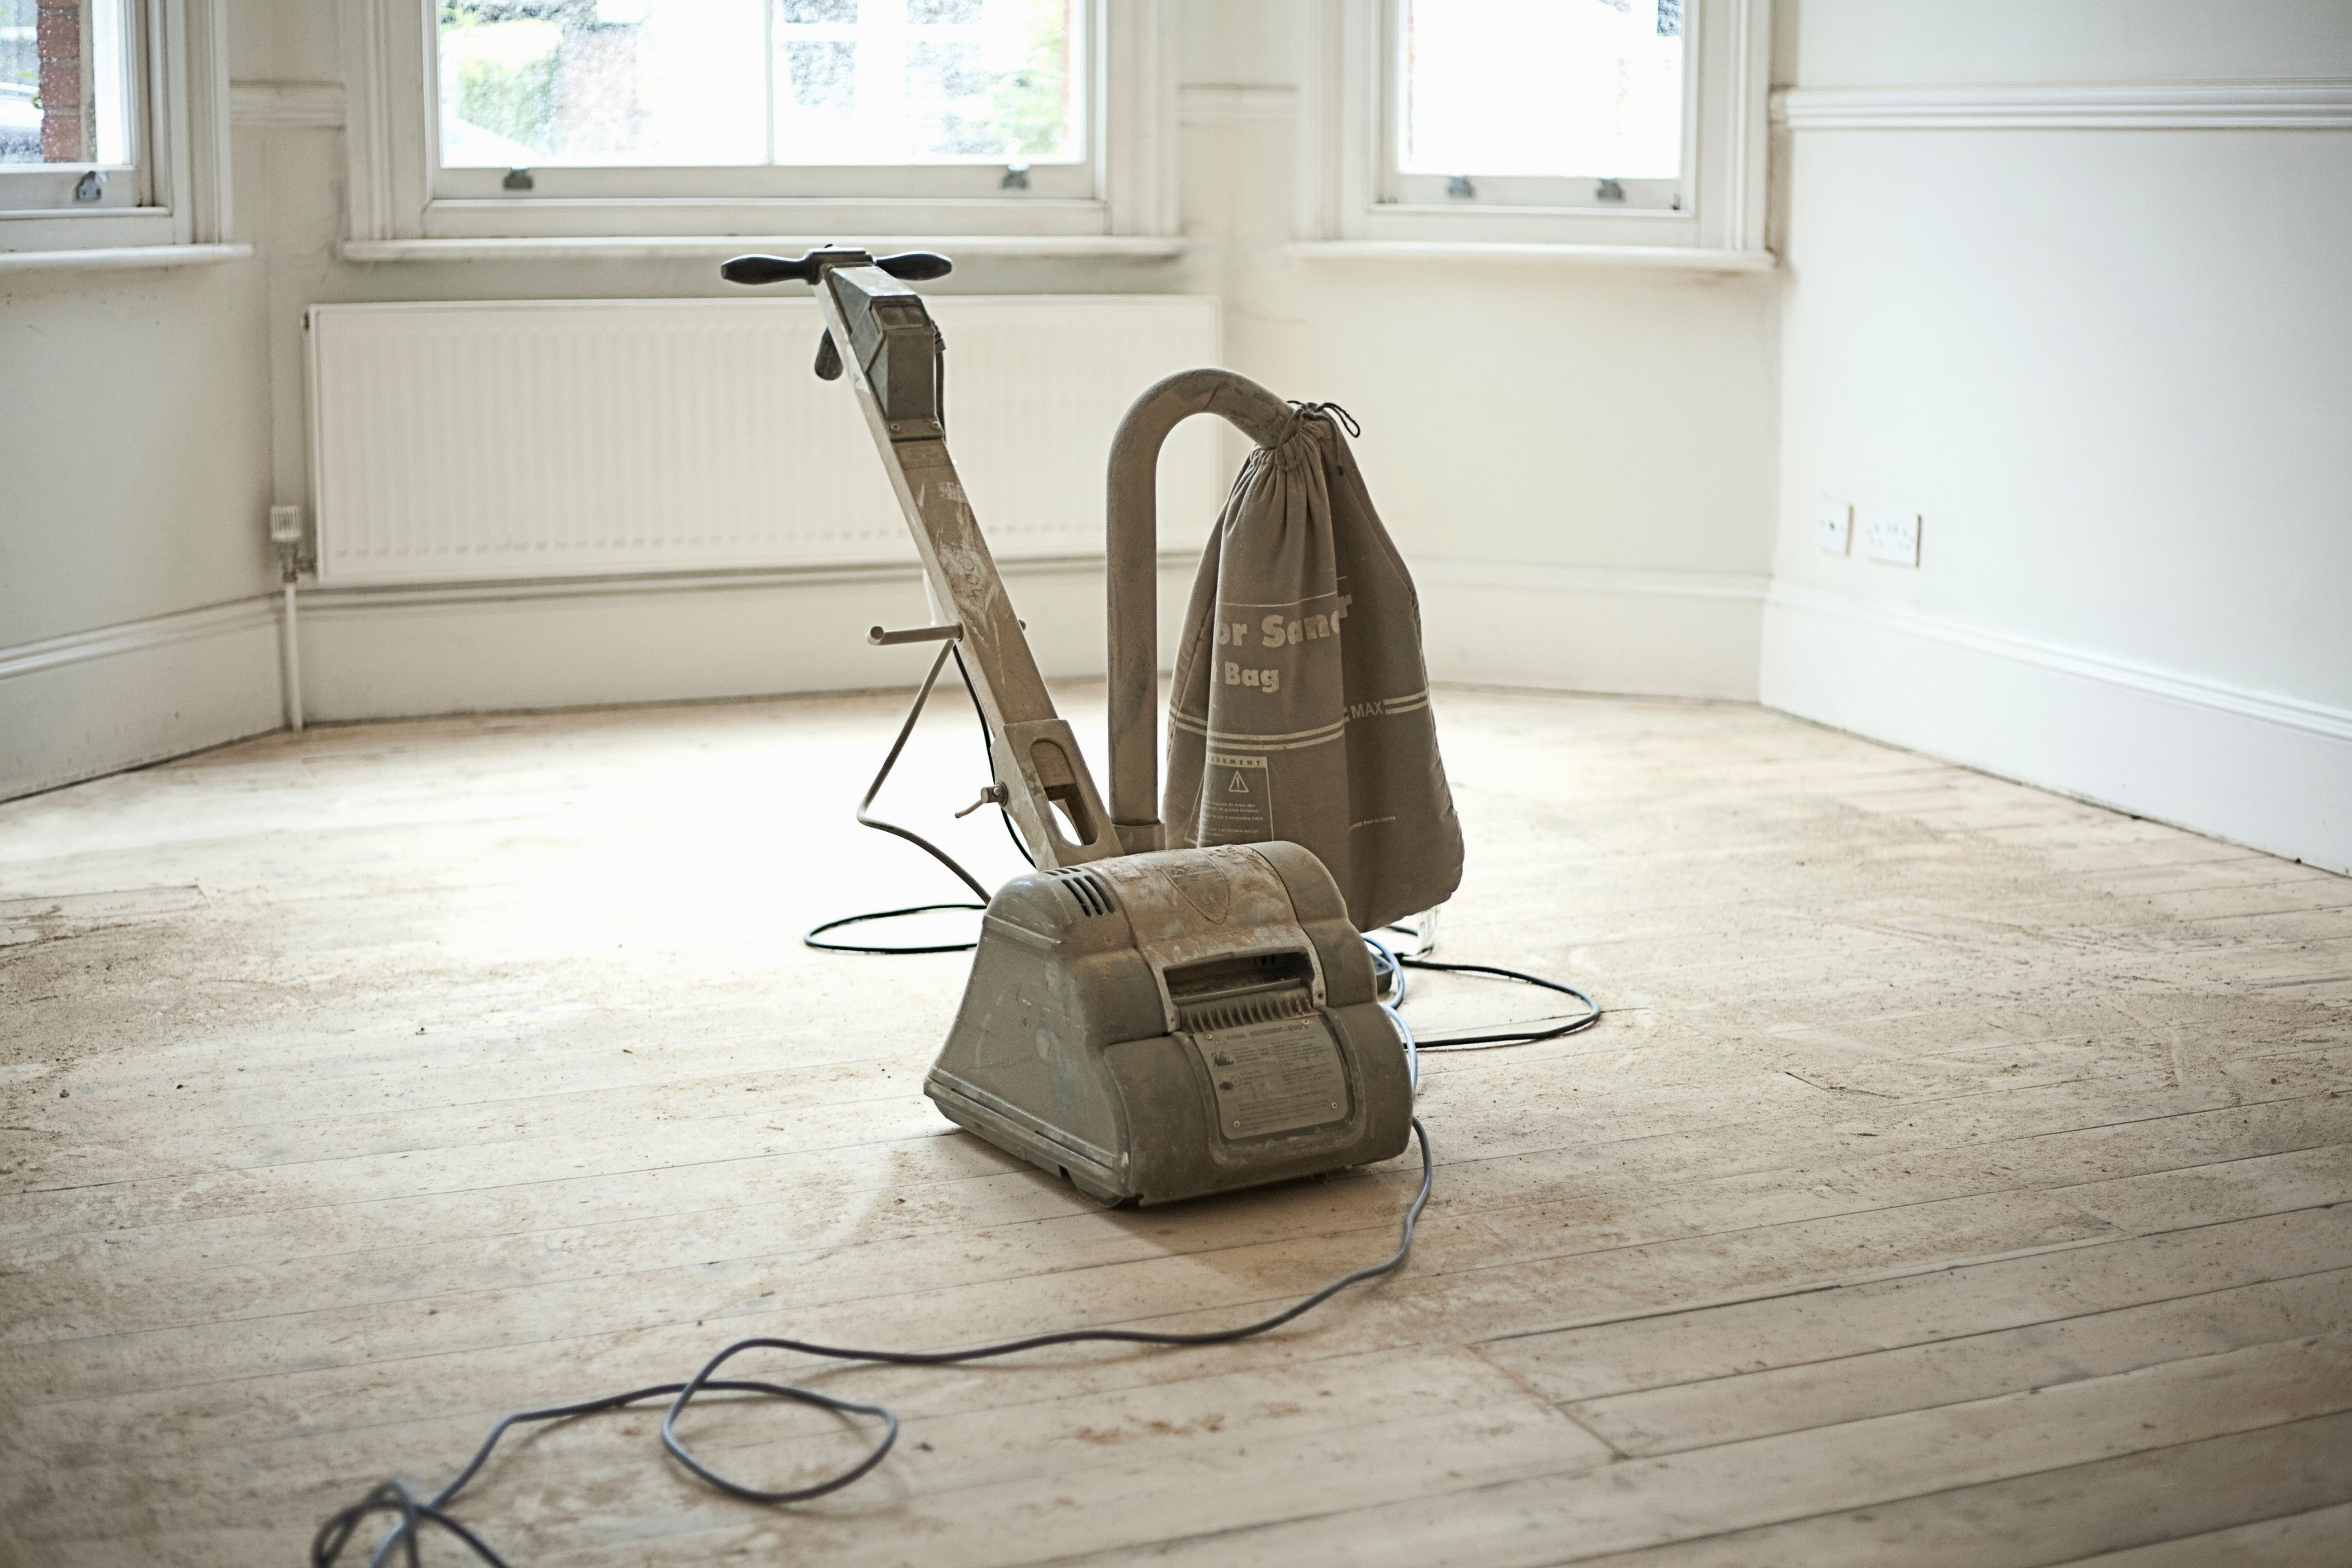 12 Unique Hardwood Floor Dust Vacuum 2024 free download hardwood floor dust vacuum of floor sanders to rent when finishing your wood floor pertaining to sander on wooden floorboards of new home 179707189 588760815f9b58bdb3fed440